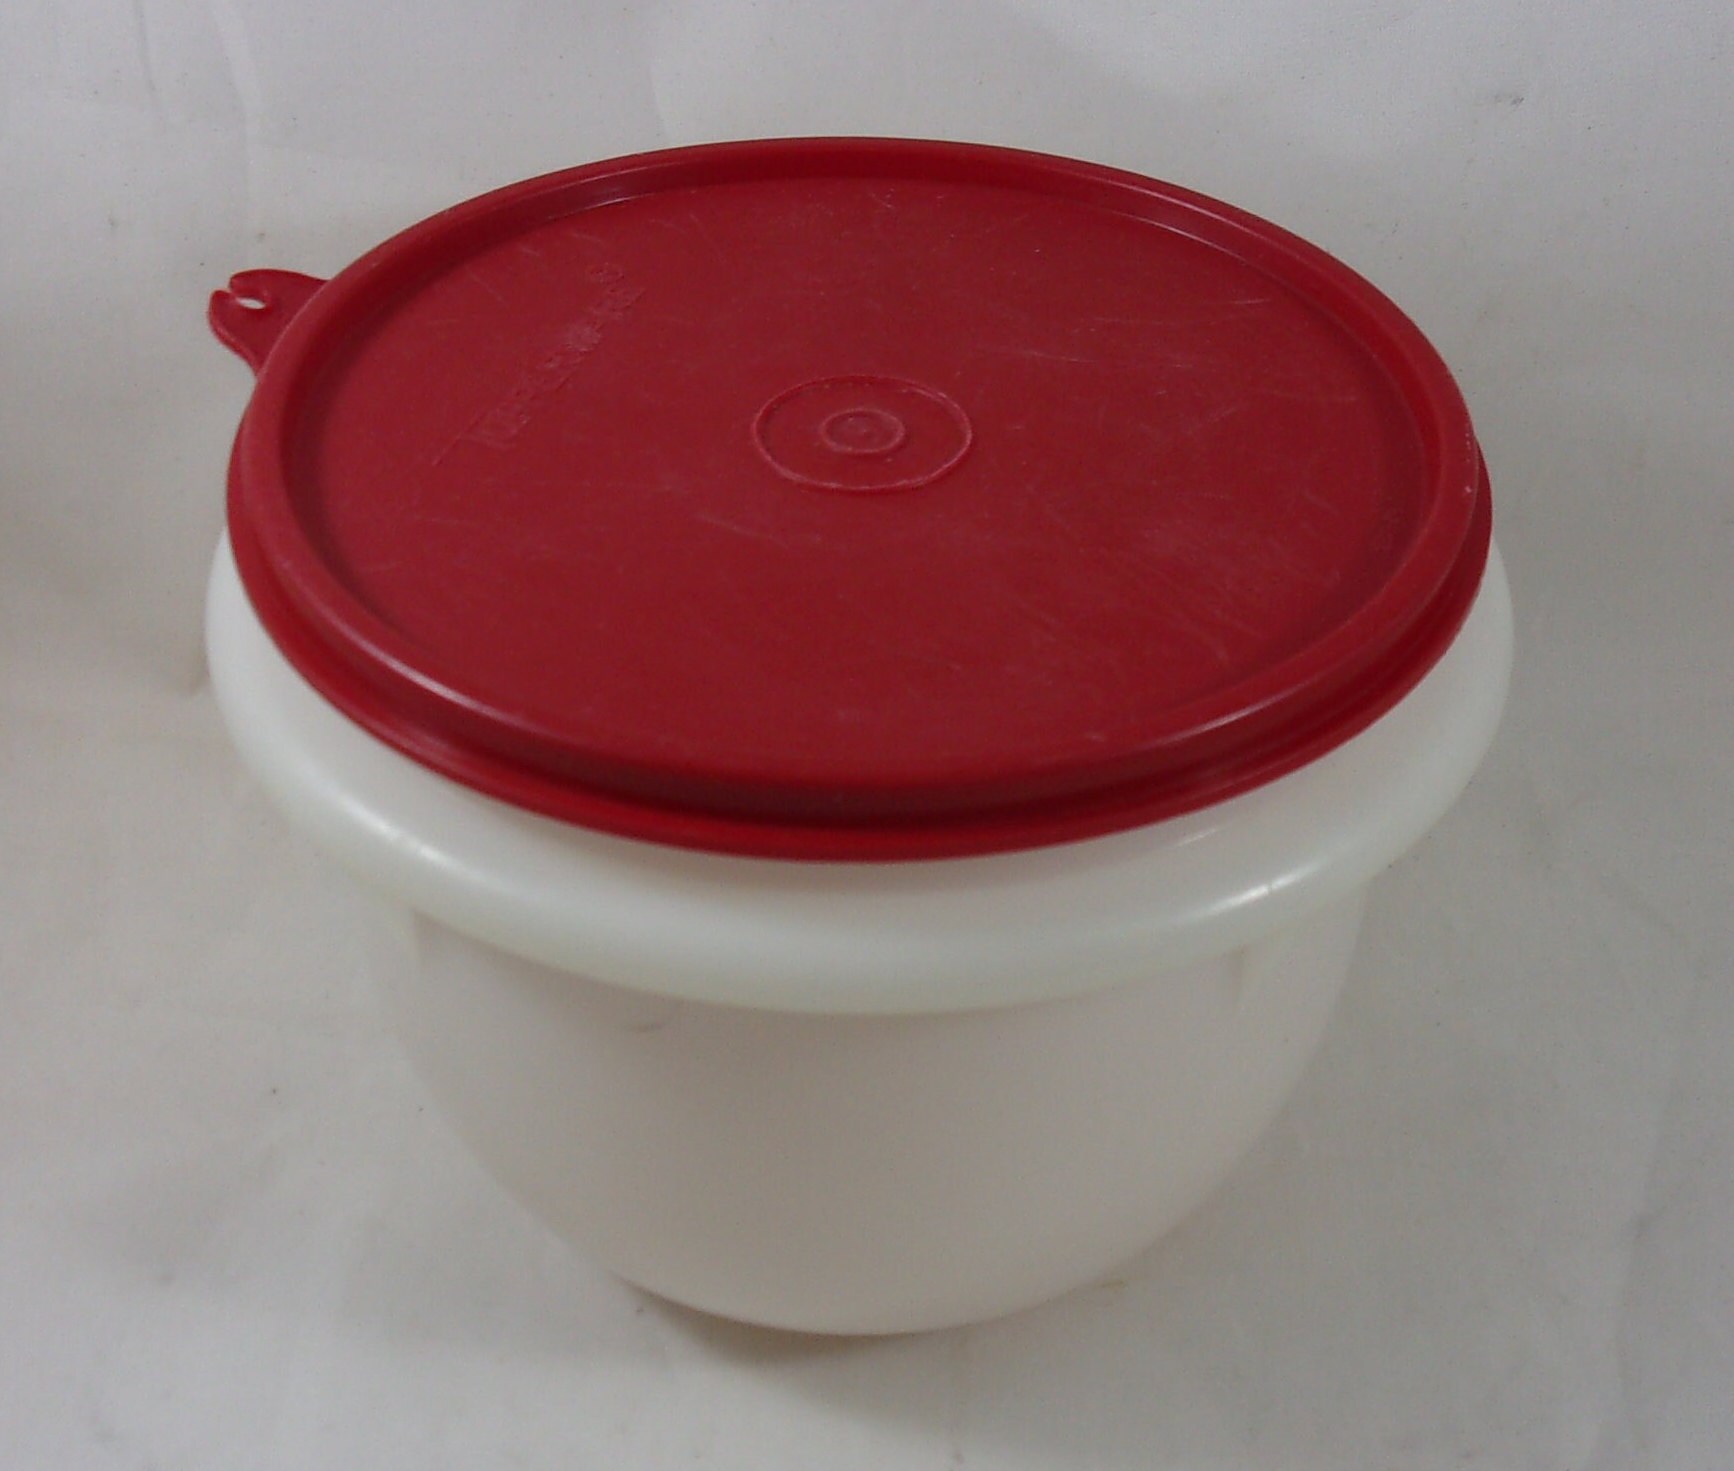 Pending Pick Up-Large Tupperware Bowl w/ Lid for Sale in Everett